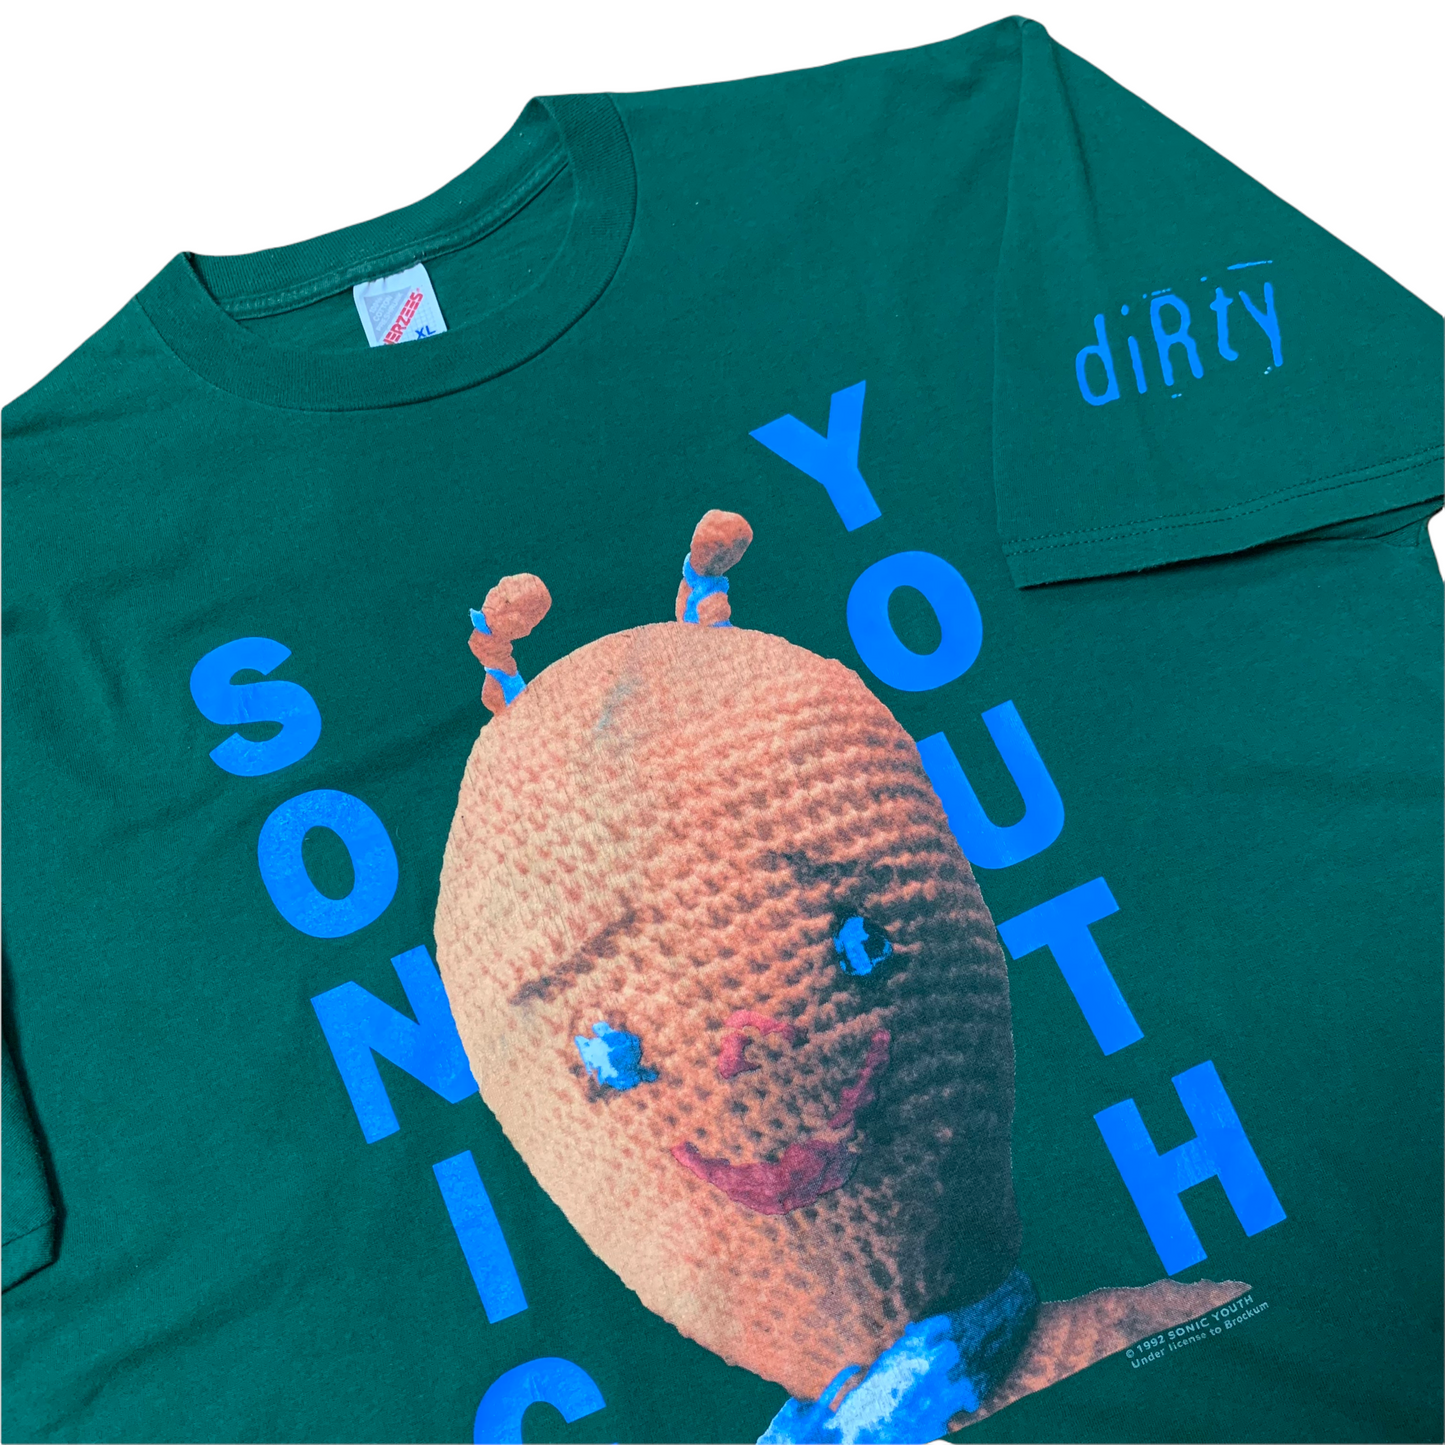 1992 Sonic Youth ‘Dirty’ (XL)